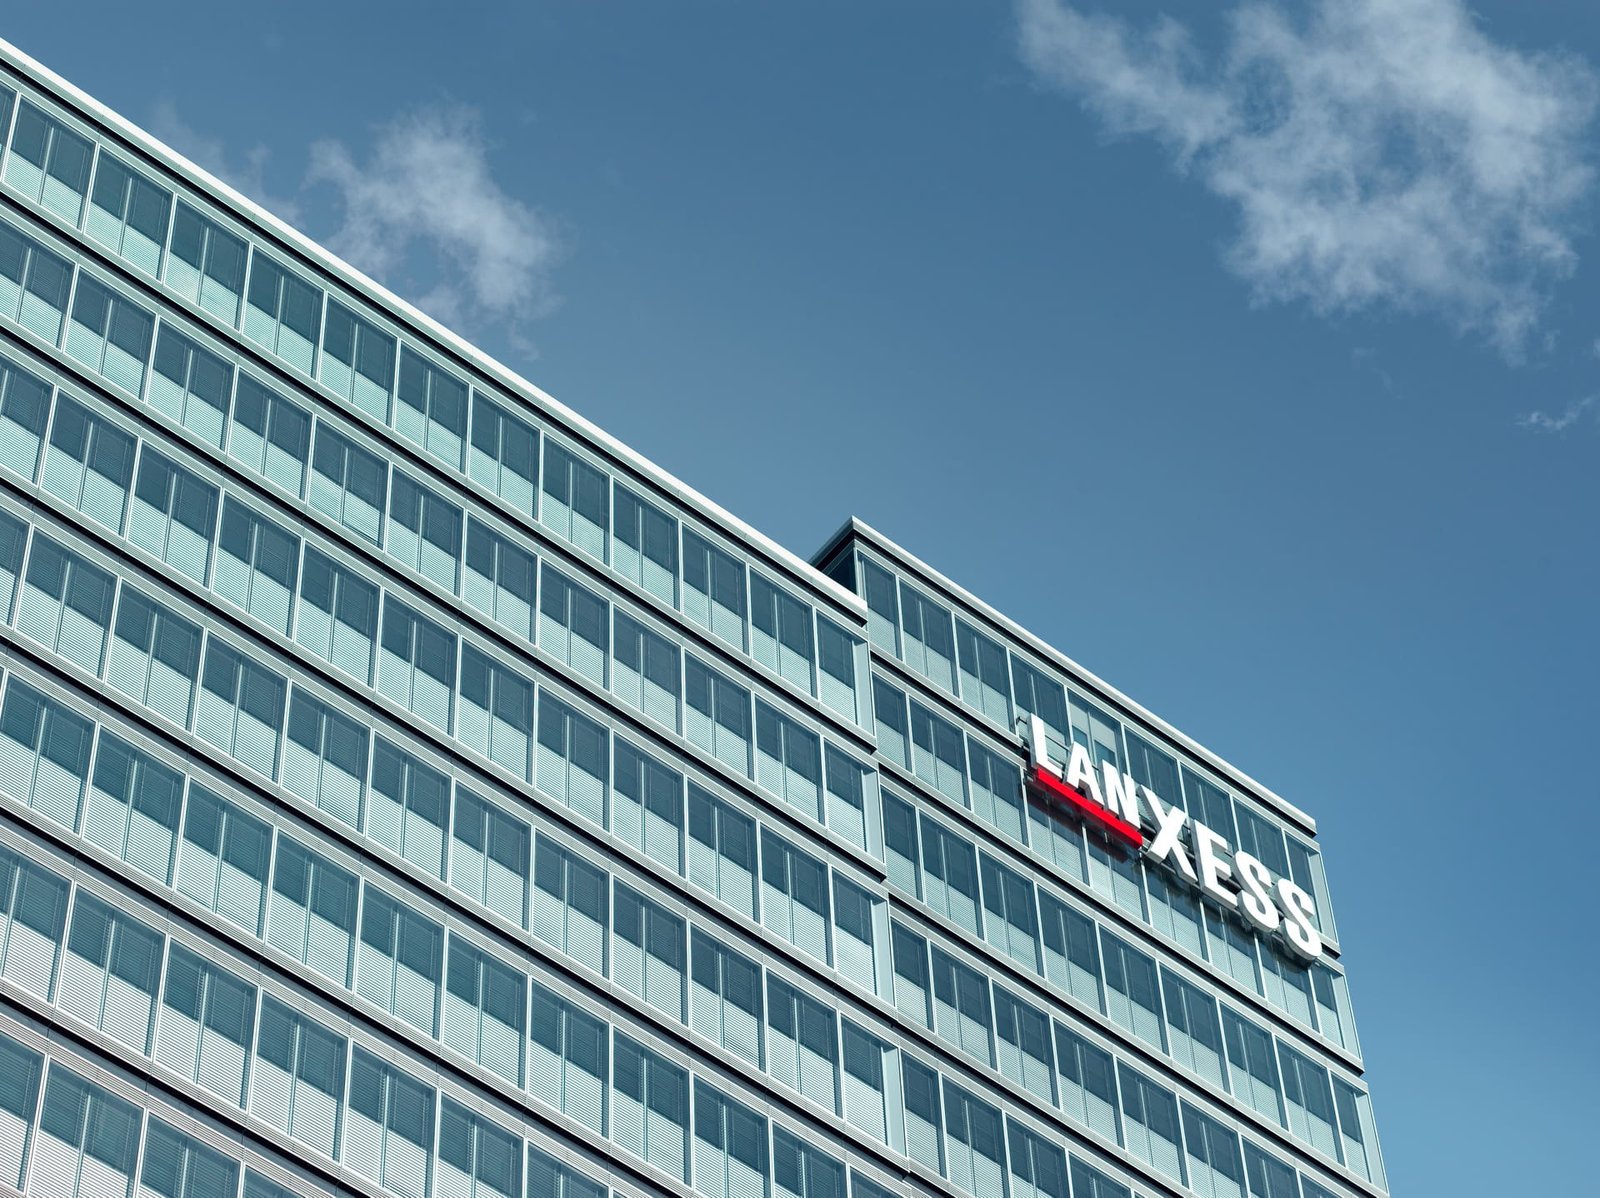 LANXESS MAKES STRONG STRONG START TO FISCAL YEAR 2022